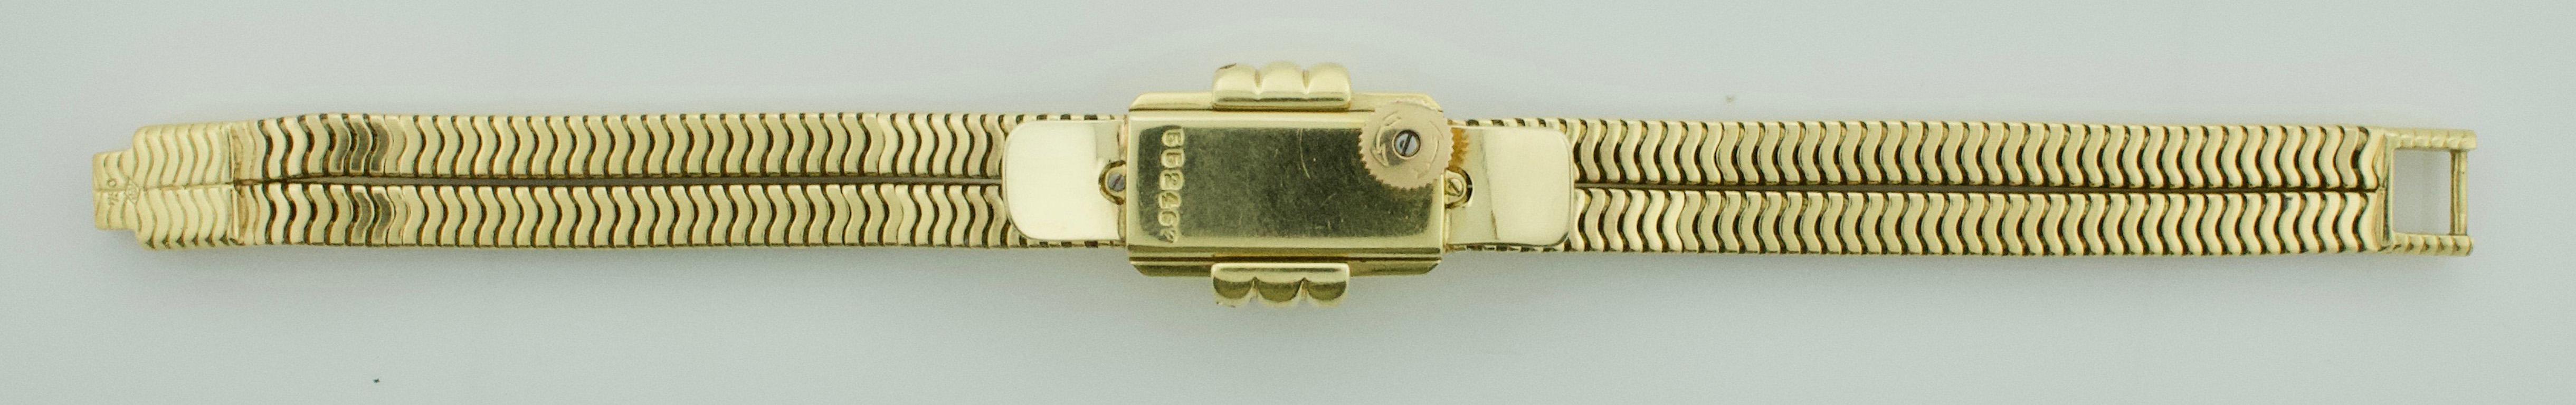 Jaeger-LeCoultre Cover Watch in 18 Karat, circa 1950s For Sale 7